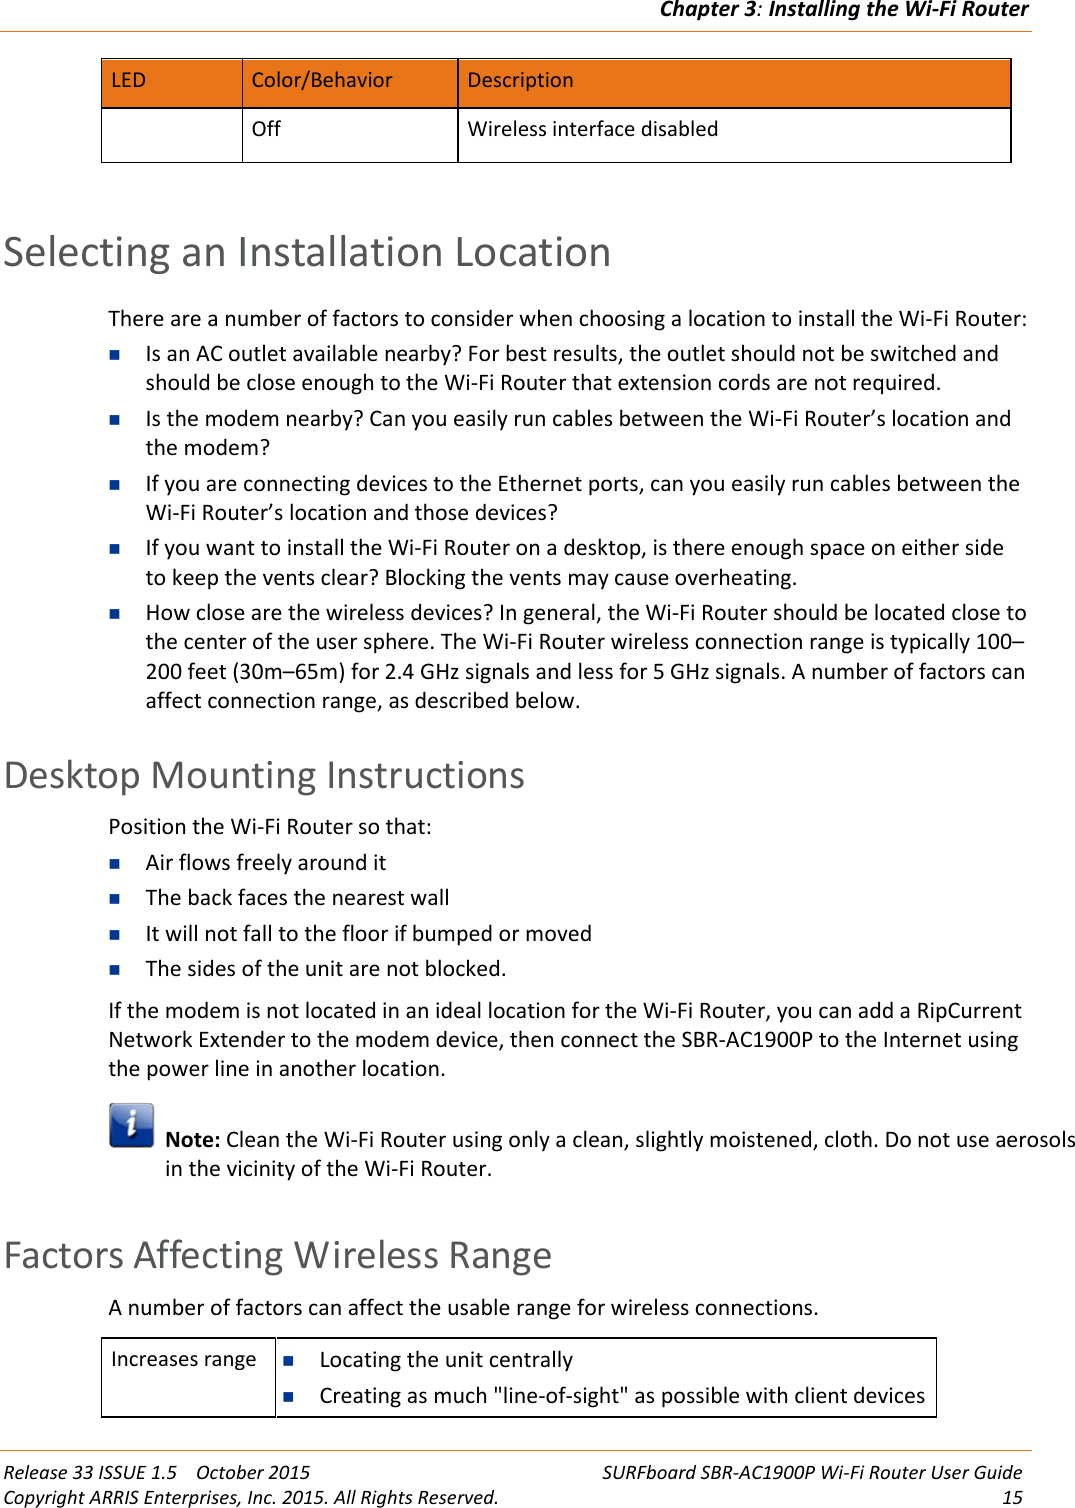 Chapter 3:Installing the Wi-Fi RouterRelease 33 ISSUE 1.5 October 2015 SURFboard SBR-AC1900P Wi-Fi Router User GuideCopyright ARRIS Enterprises, Inc. 2015. All Rights Reserved. 15LED Color/Behavior DescriptionOff Wireless interface disabledSelecting an Installation LocationThere are a number of factors to consider when choosing a location to install the Wi-Fi Router:Is an AC outlet available nearby? For best results, the outlet should not be switched andshould be close enough to the Wi-Fi Router that extension cords are not required.Is the modem nearby? Can you easily run cables between the Wi-Fi Router’s location andthe modem?If you are connecting devices to the Ethernet ports, can you easily run cables between theWi-Fi Router’s location and those devices?If you want to install the Wi-Fi Router on a desktop, is there enough space on either sideto keep the vents clear? Blocking the vents may cause overheating.How close are the wireless devices? In general, the Wi-Fi Router should be located close tothe center of the user sphere. The Wi-Fi Router wireless connection range is typically 100–200 feet (30m–65m) for 2.4 GHz signals and less for 5 GHz signals. A number of factors canaffect connection range, as described below.Desktop Mounting InstructionsPosition the Wi-Fi Router so that:Air flows freely around itThe back faces the nearest wallIt will not fall to the floor if bumped or movedThe sides of the unit are not blocked.If the modem is not located in an ideal location for the Wi-Fi Router, you can add a RipCurrentNetwork Extender to the modem device, then connect the SBR-AC1900P to the Internet usingthe power line in another location.Note: Clean the Wi-Fi Router using only a clean, slightly moistened, cloth. Do not use aerosolsin the vicinity of the Wi-Fi Router.Factors Affecting Wireless RangeA number of factors can affect the usable range for wireless connections.Increases range Locating the unit centrallyCreating as much &quot;line-of-sight&quot; as possible with client devices